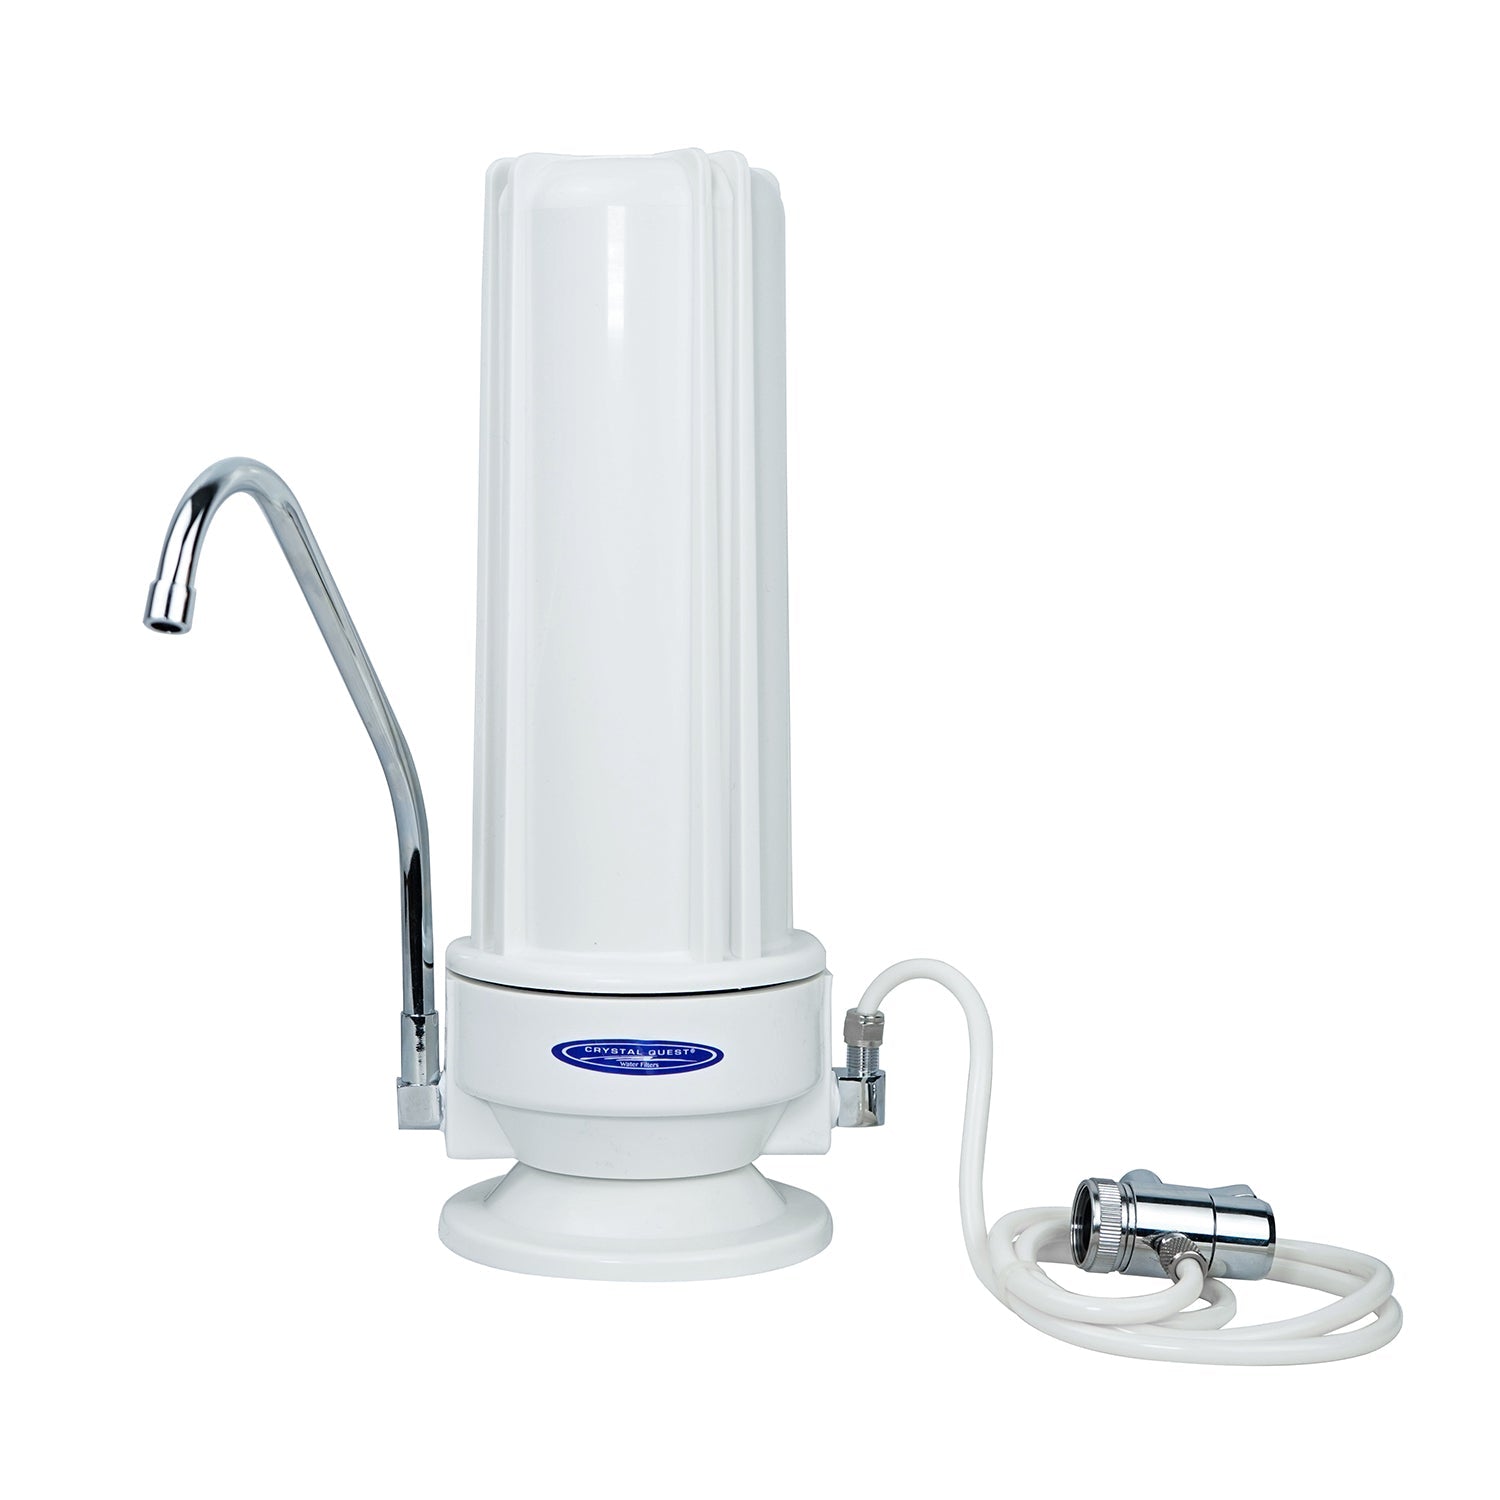 Crystal Quest Arsenic Countertop Water Filter System Single Polypropylene